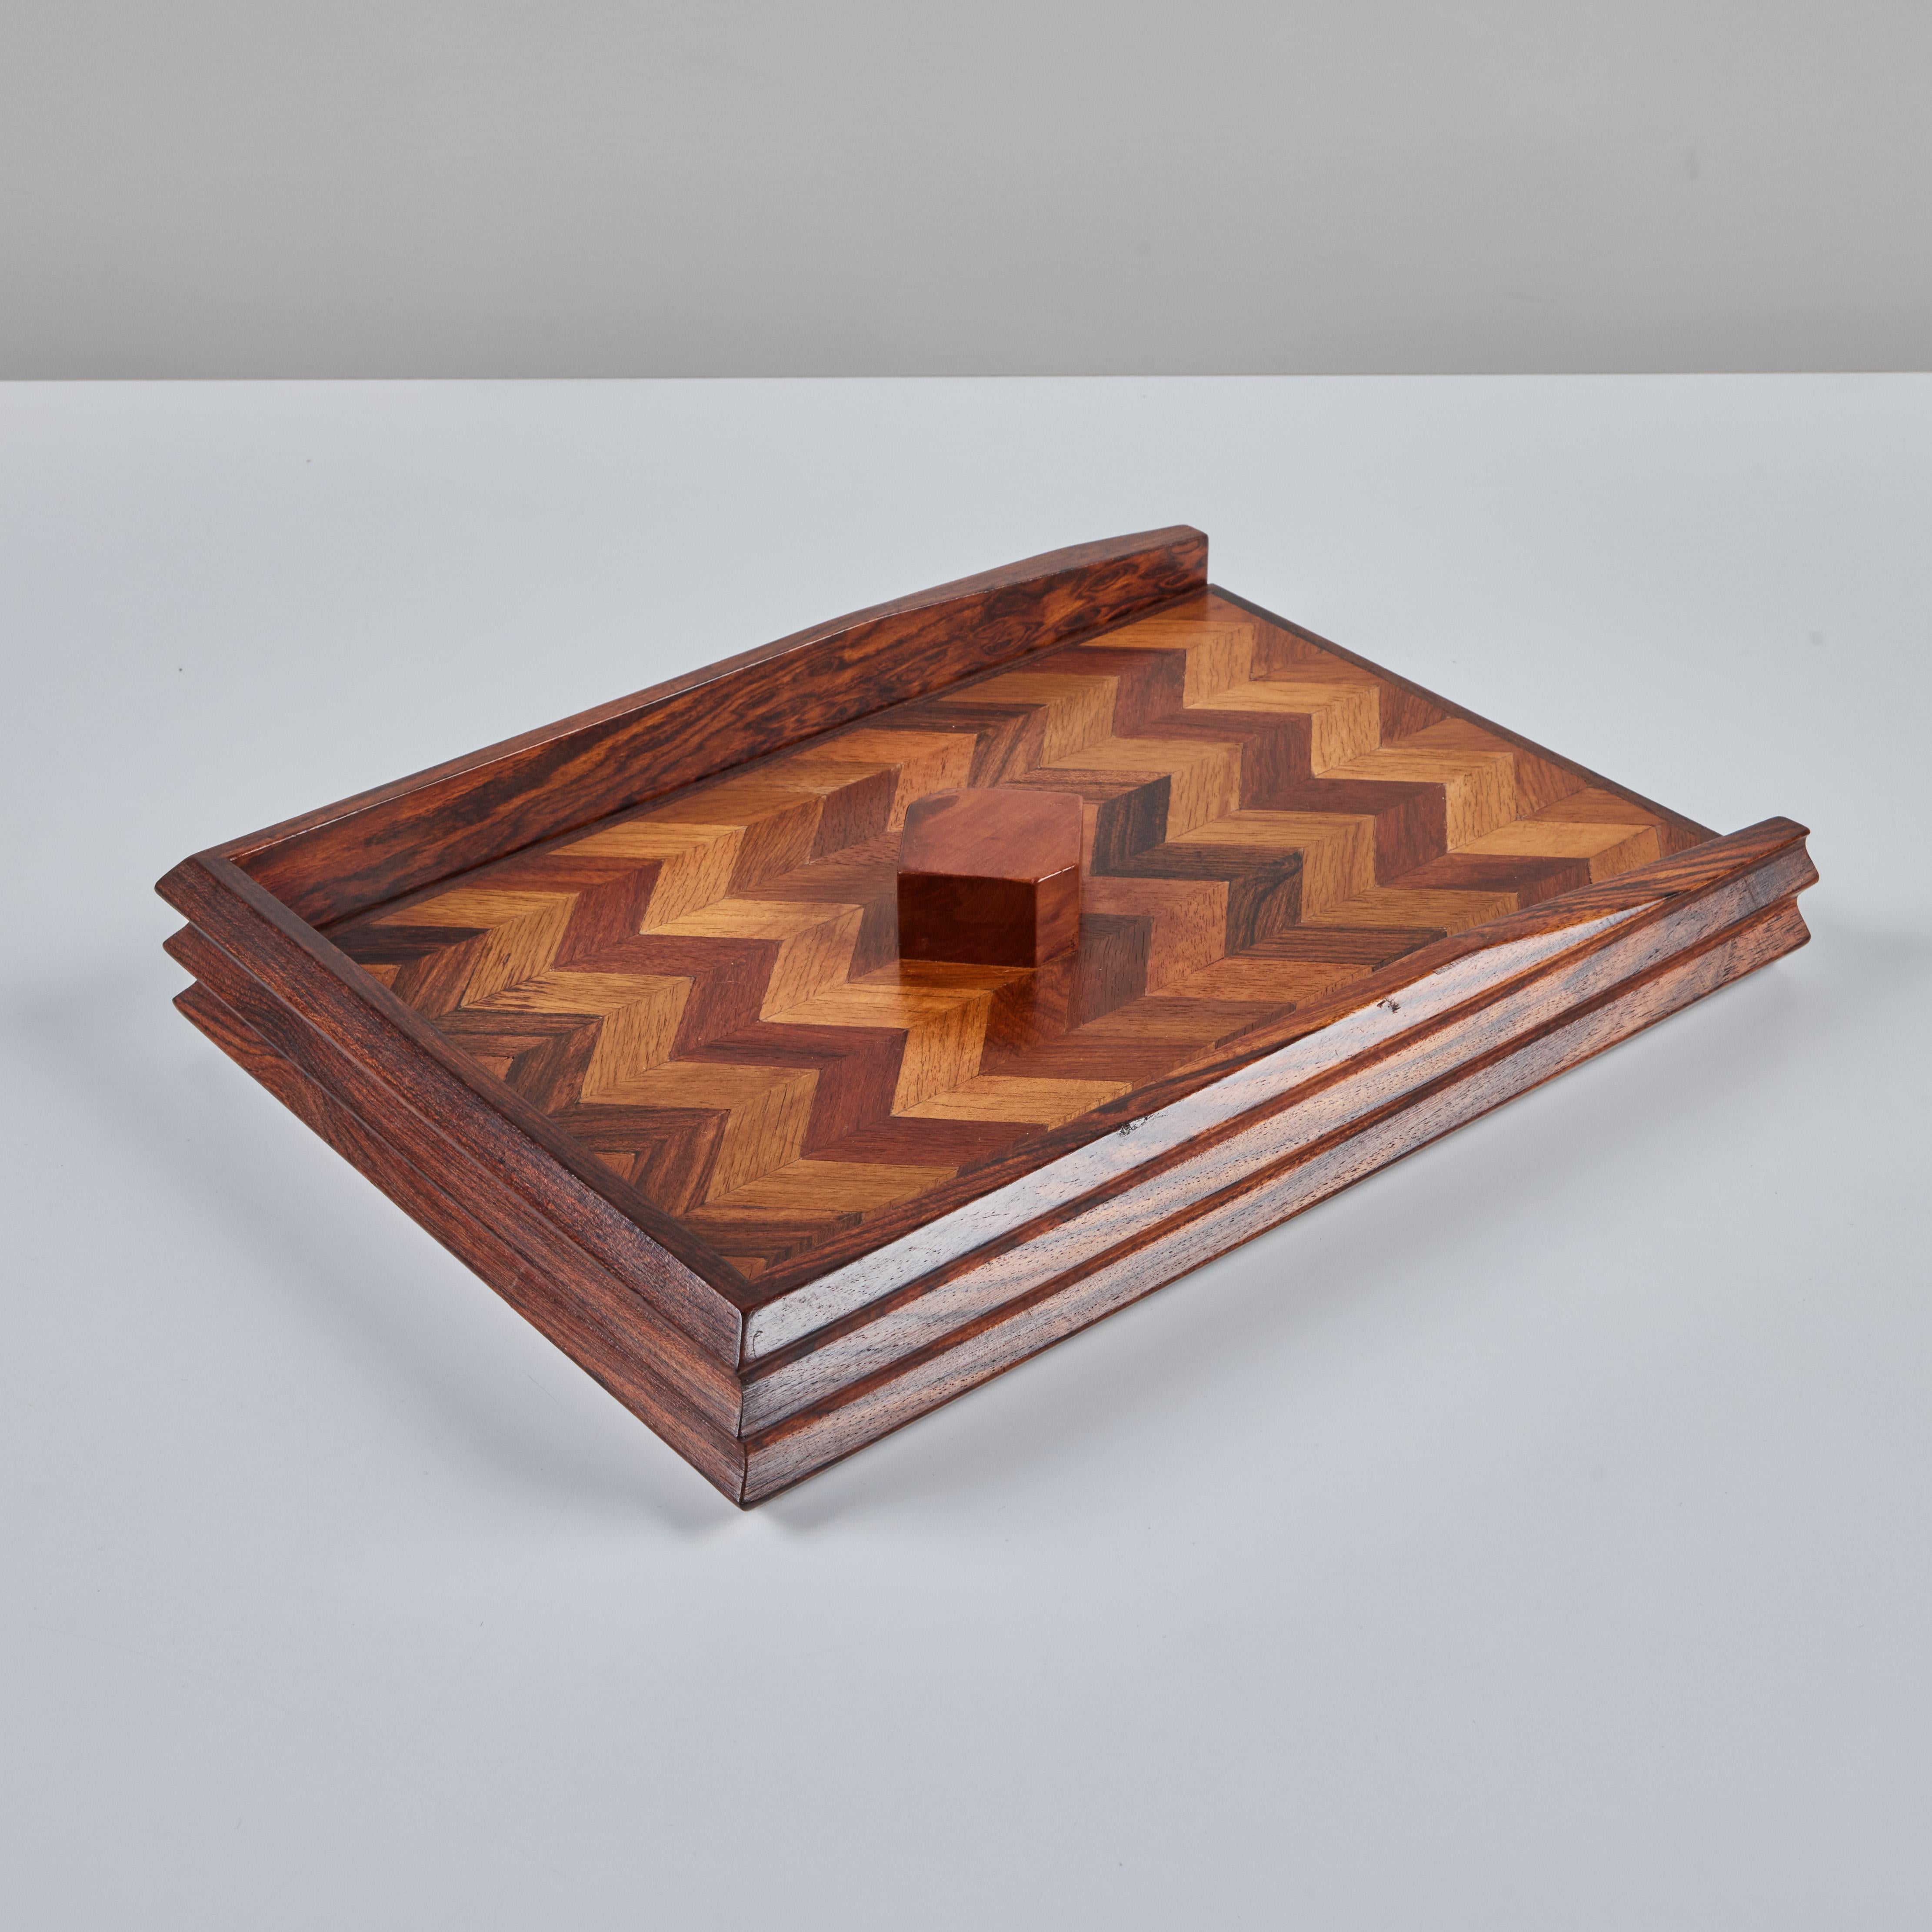 Cocobolo paper tray with geometric pattern by Don Shoemaker for his company Señal, c.1960s, Mexico. Shoemaker is known for the marquetry in his work, which is clearly visible in the detailed design of this piece. The lid of the tray has a chevron